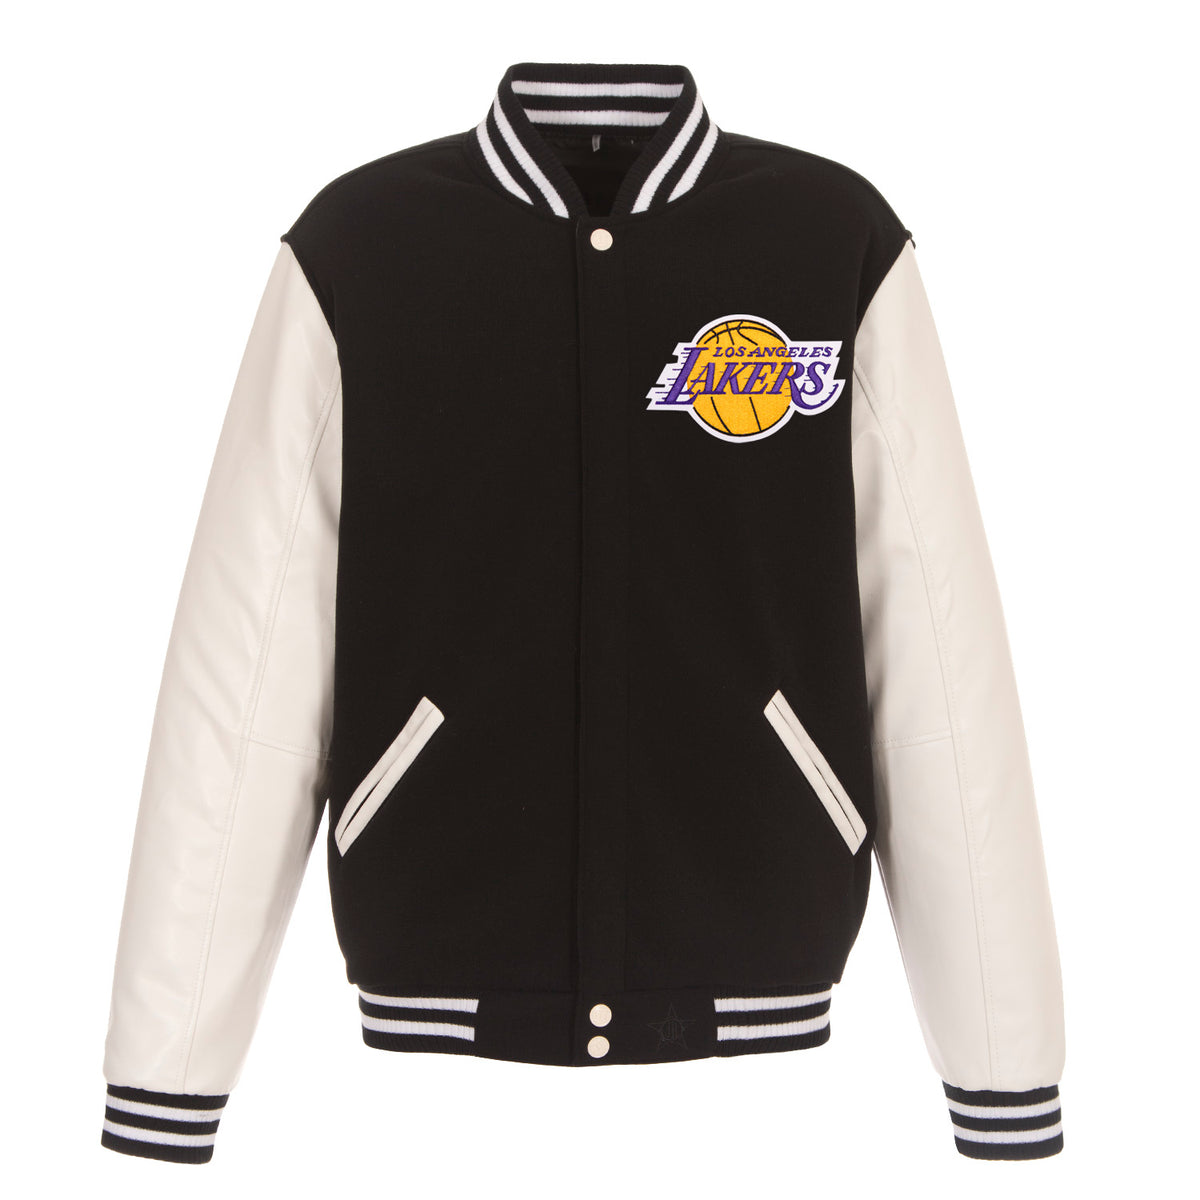 Lakers Jacket Los Angeles 17 Time NBA FINALS Championship Cotton